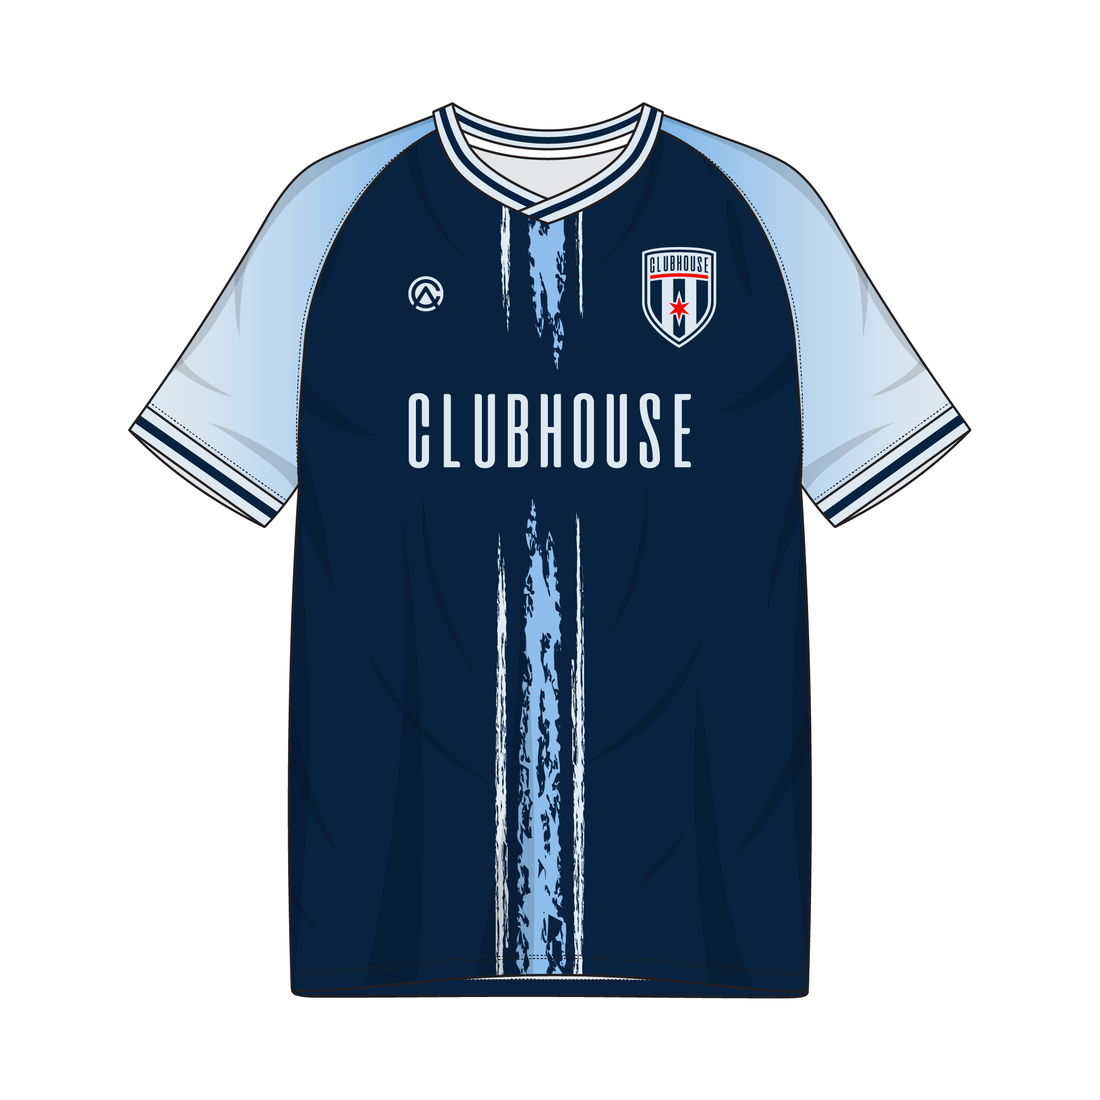 Clubhouse Original: Paint Striped Soccer Jersey